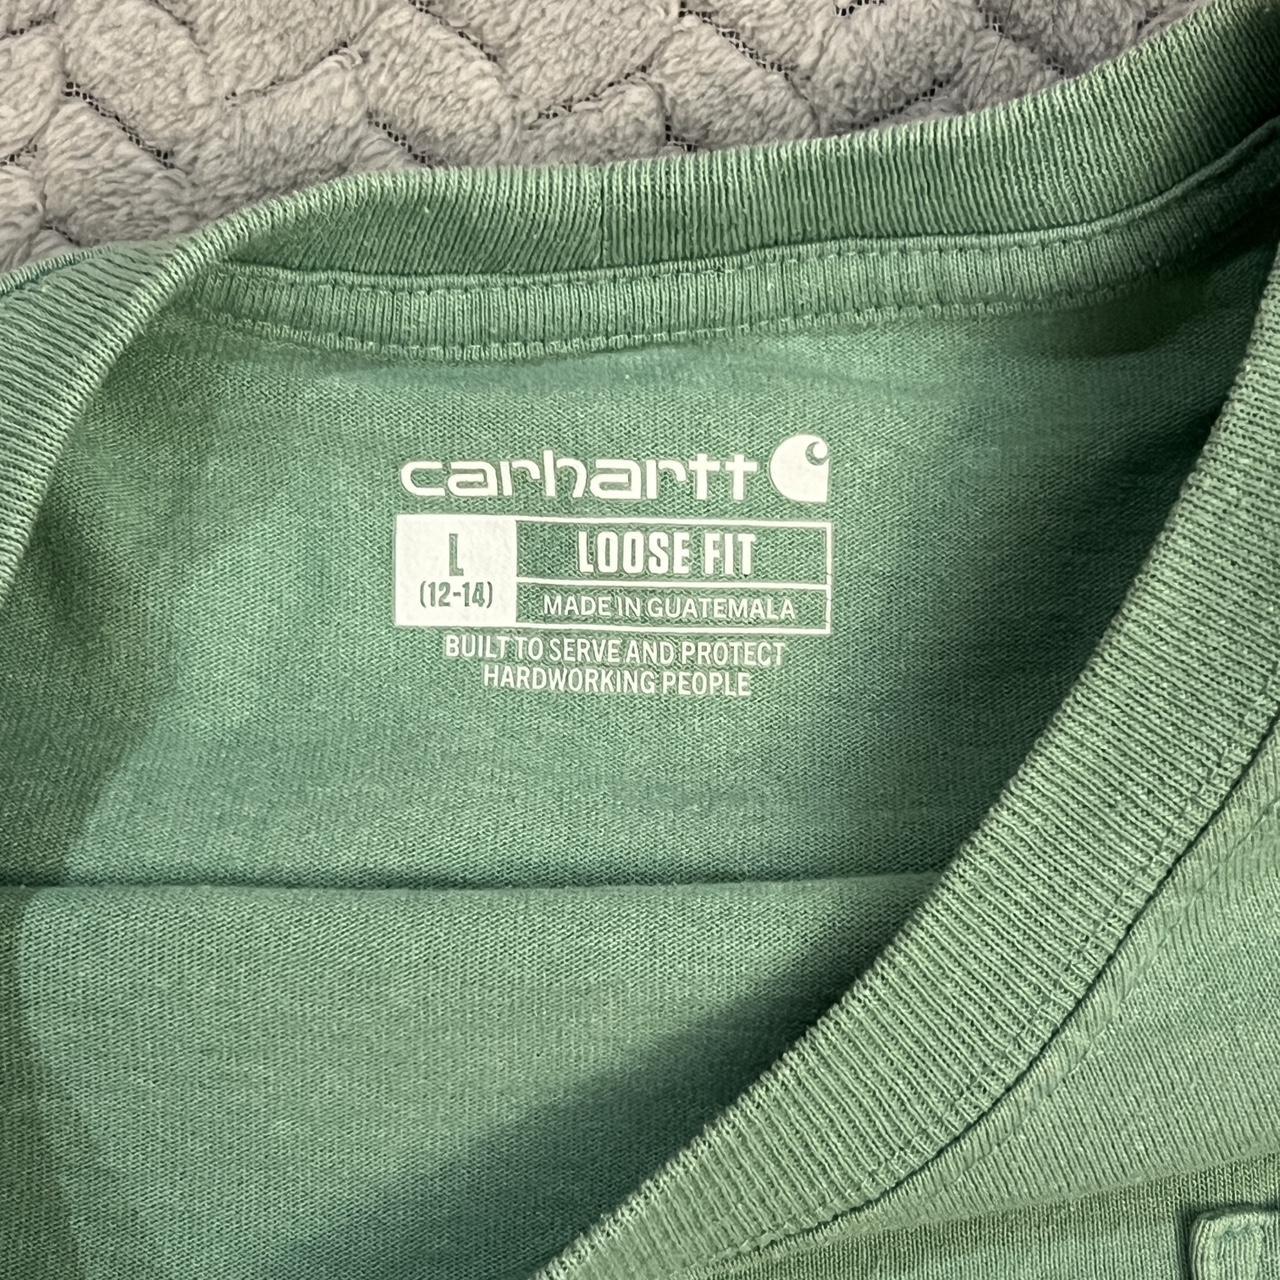 Oversized Carhartt tee ★Size large no flaws loose... - Depop